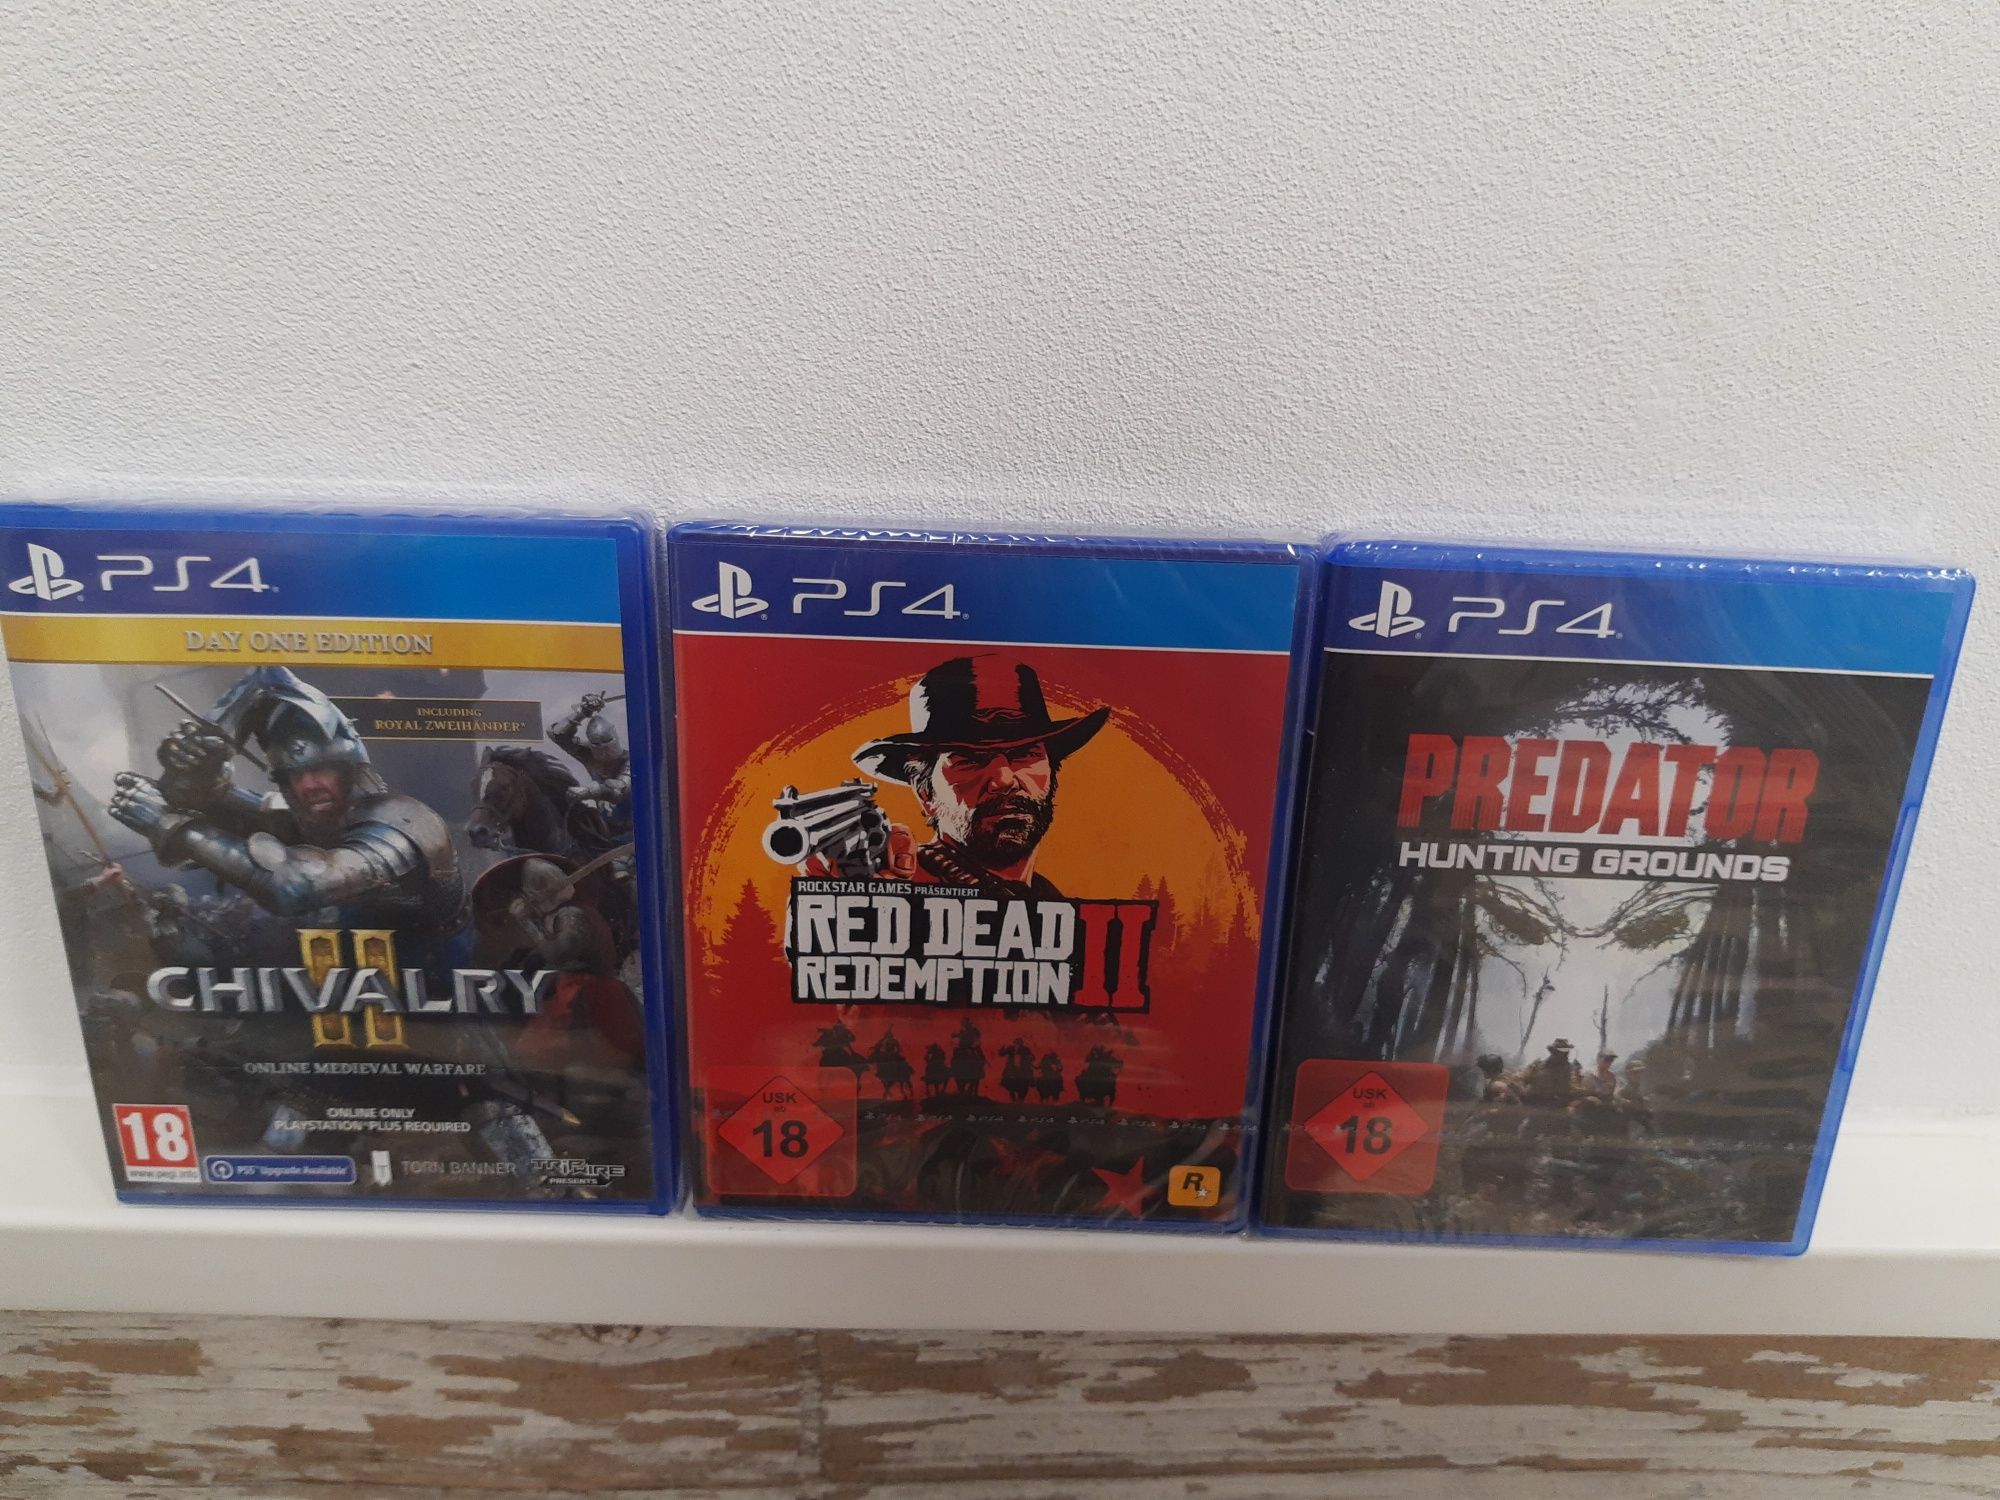 Red dead redemption 2 , Chivalry 2, Predator Hunting Grounds ps4